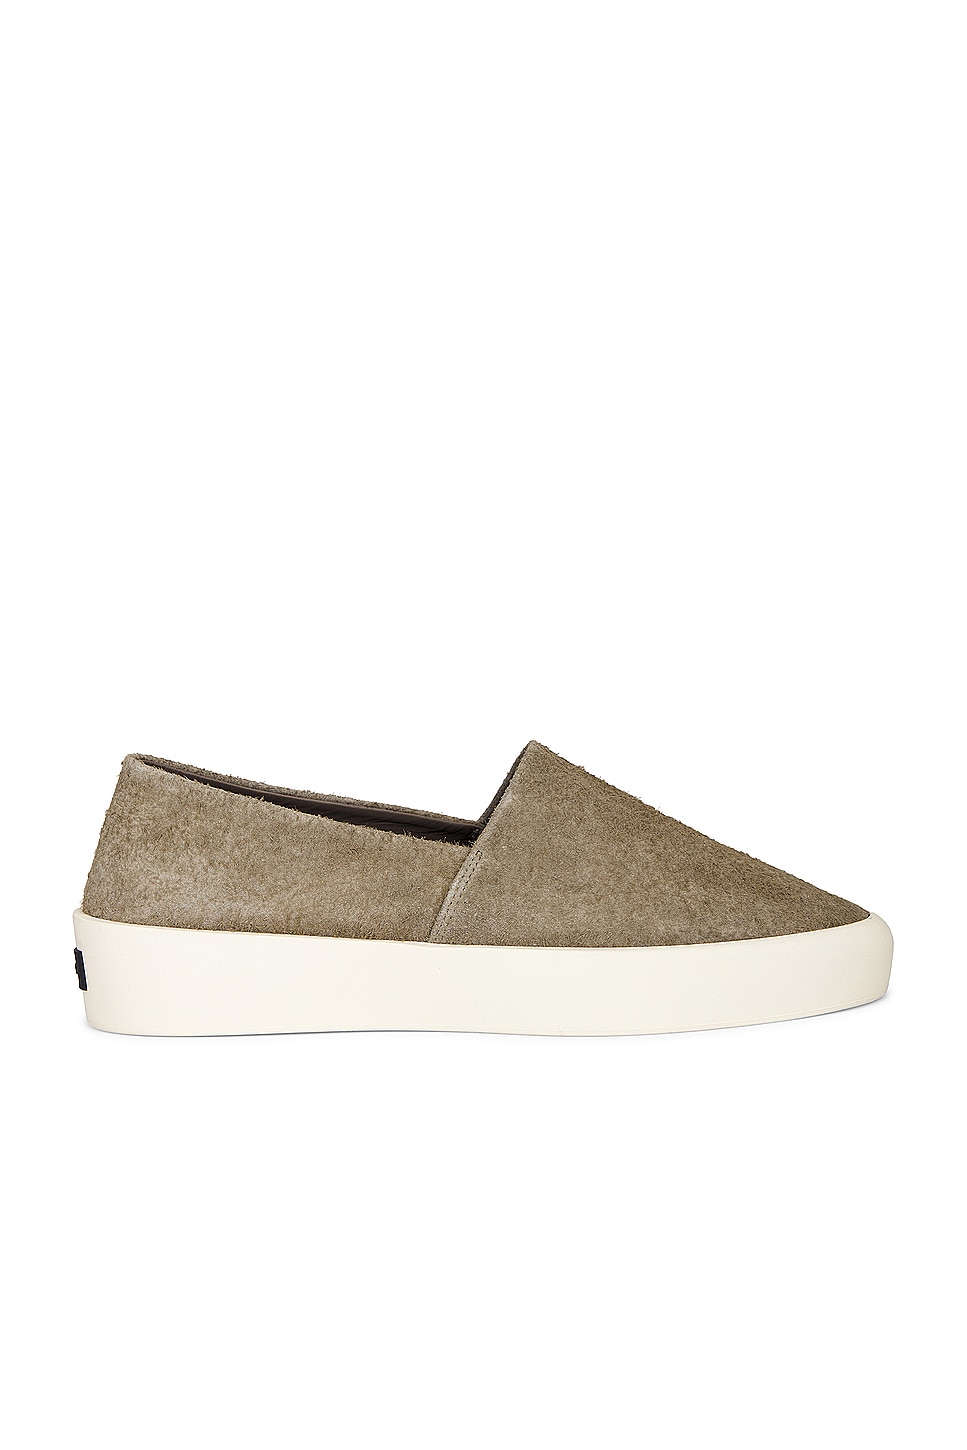 Image 1 of Fear of God Espadrille in Wolf